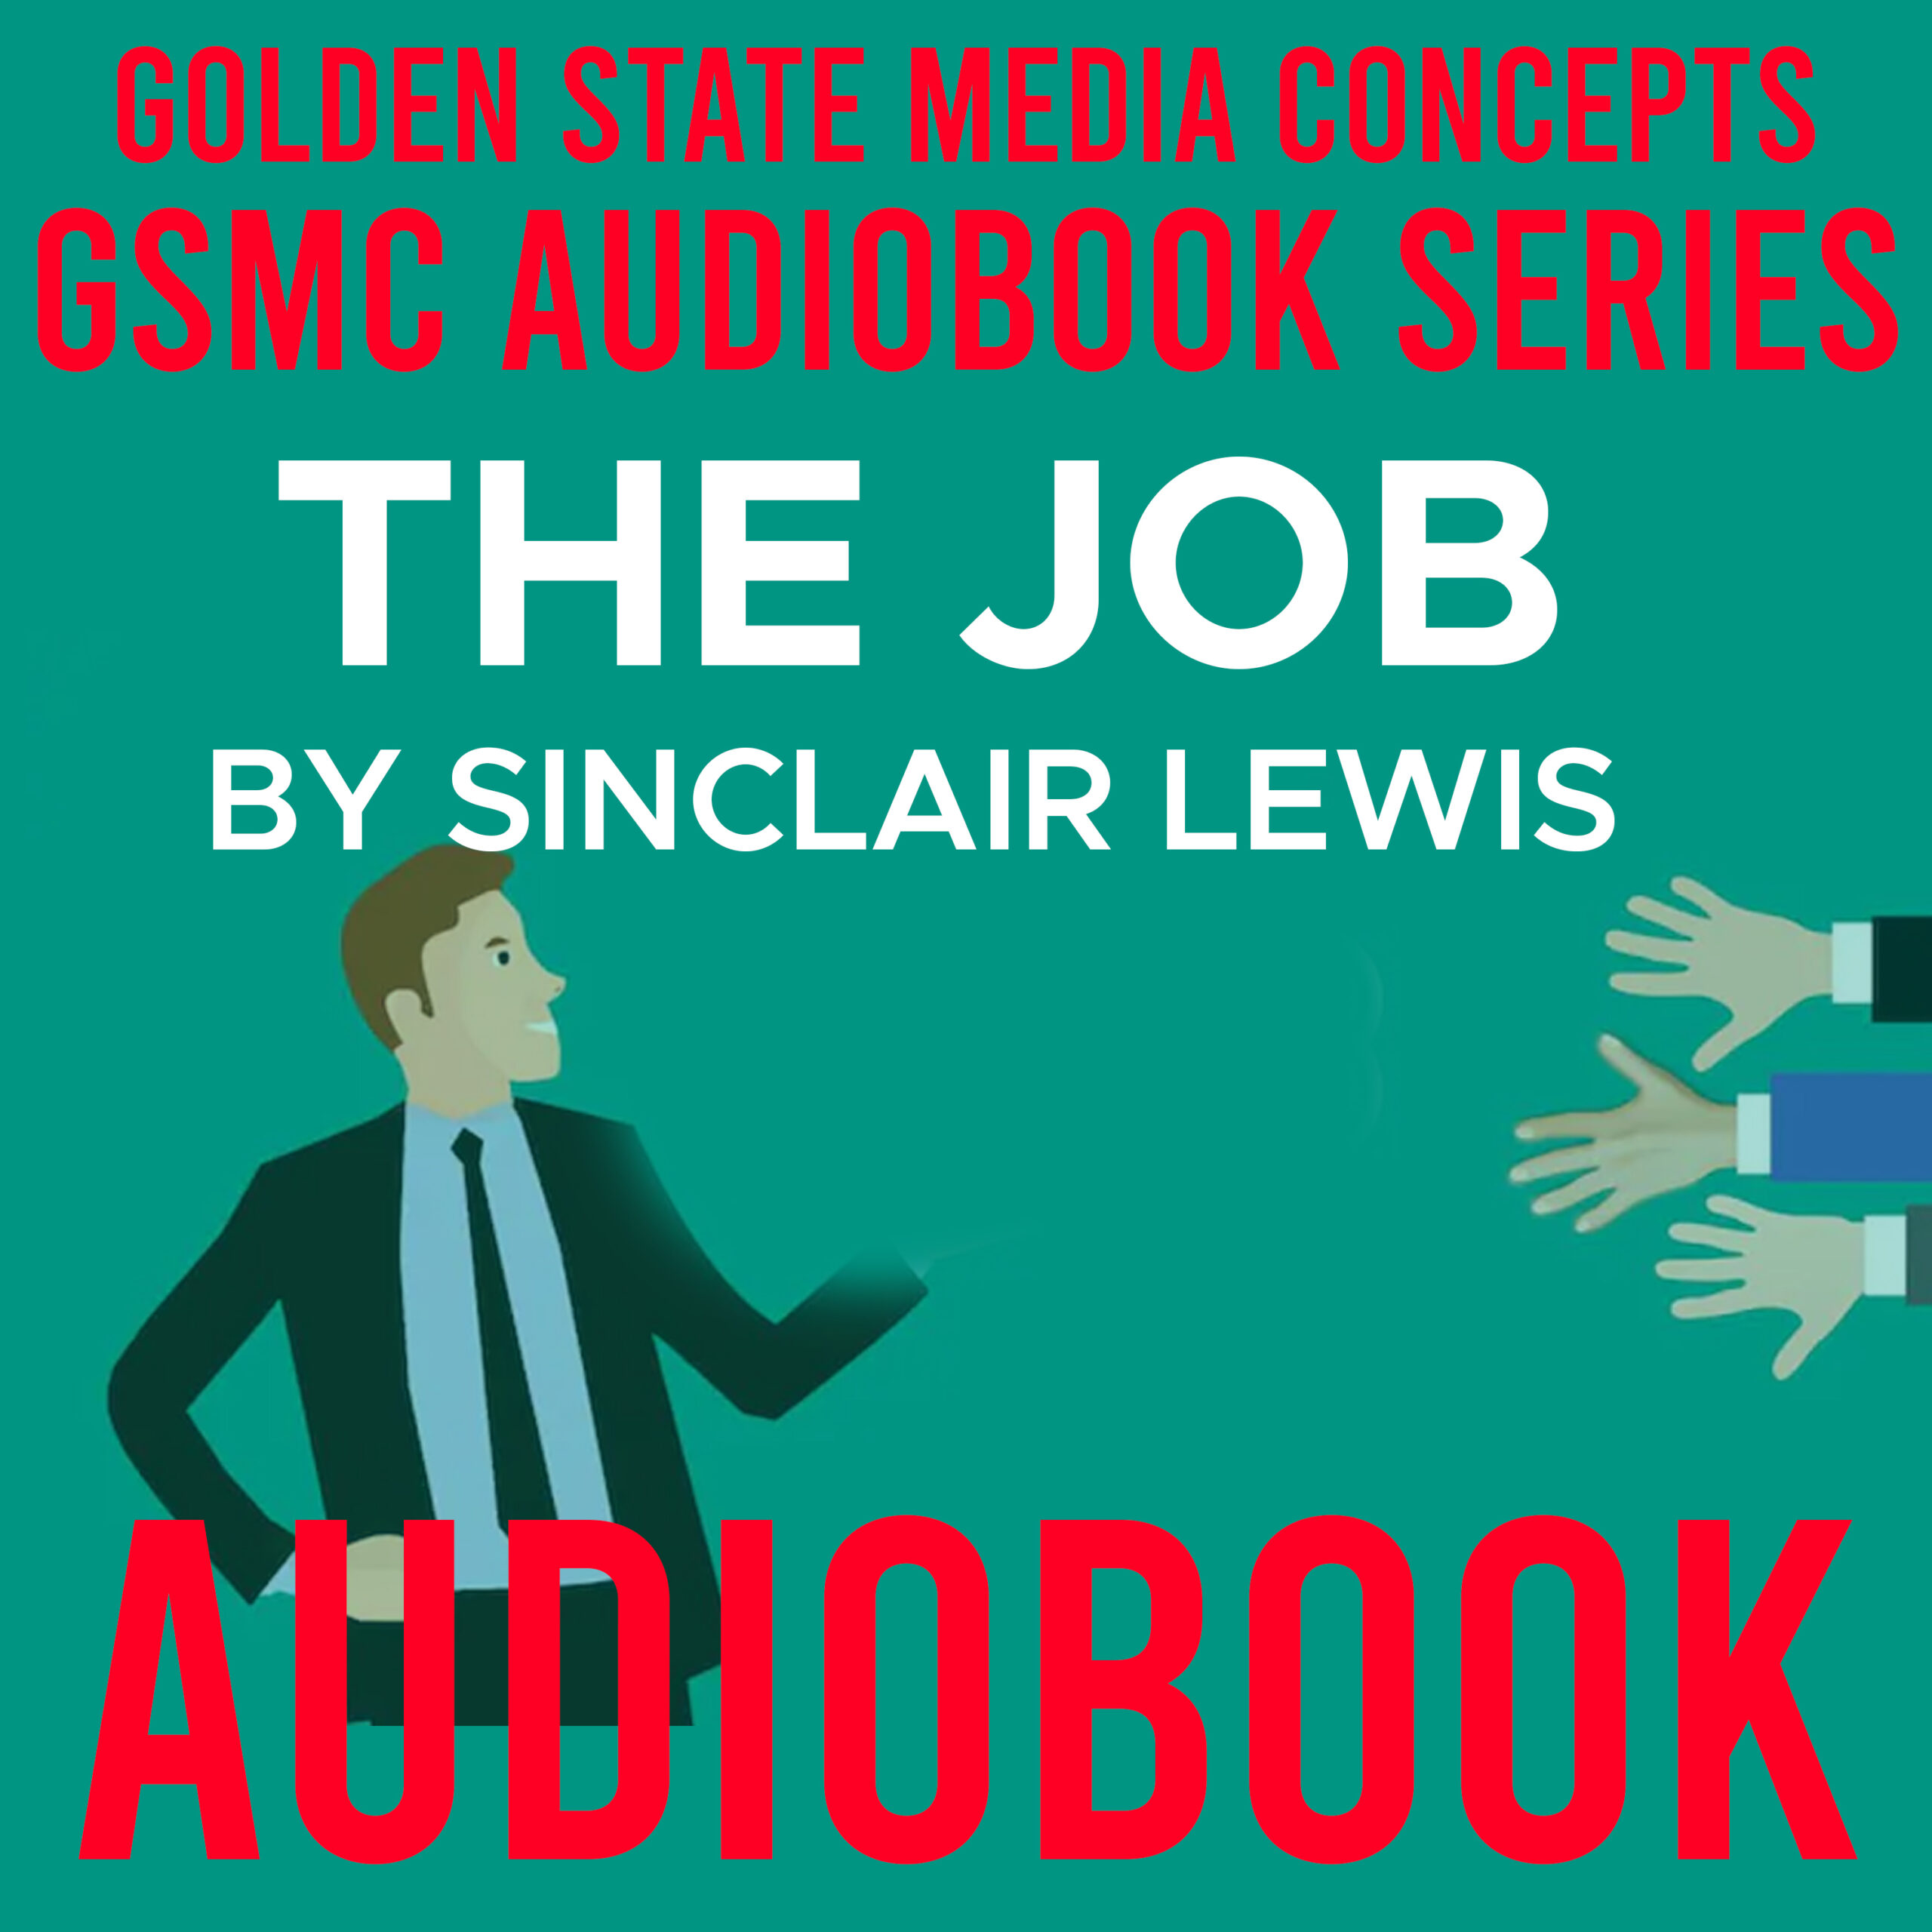 GSMC Audiobook Series: The Job by Sinclair Lewis